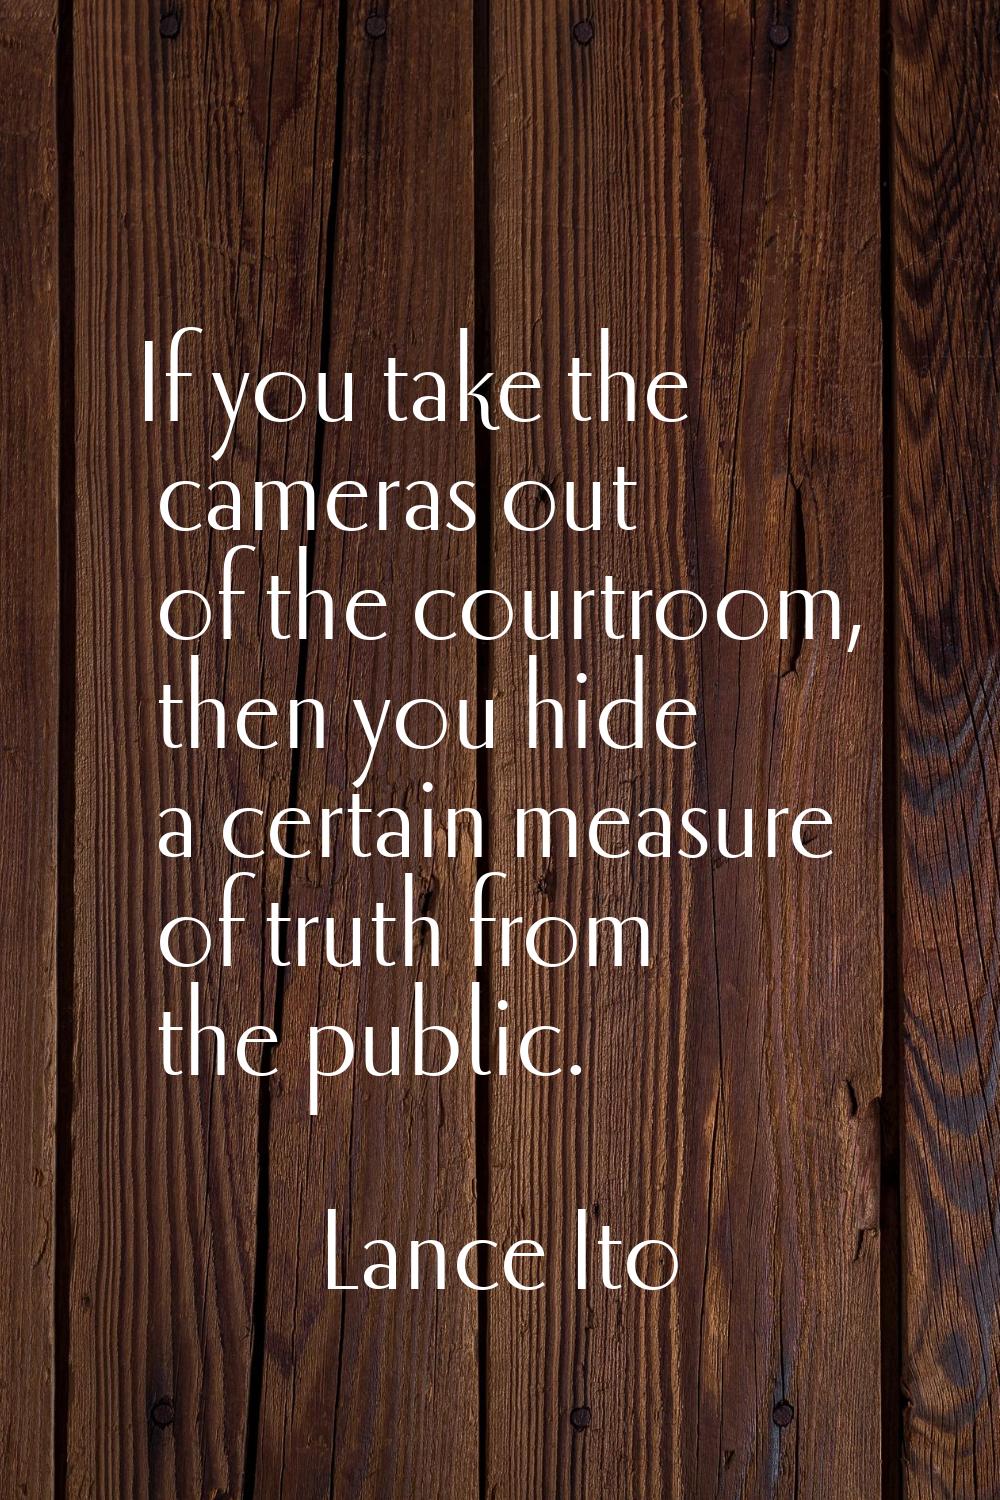 If you take the cameras out of the courtroom, then you hide a certain measure of truth from the pub